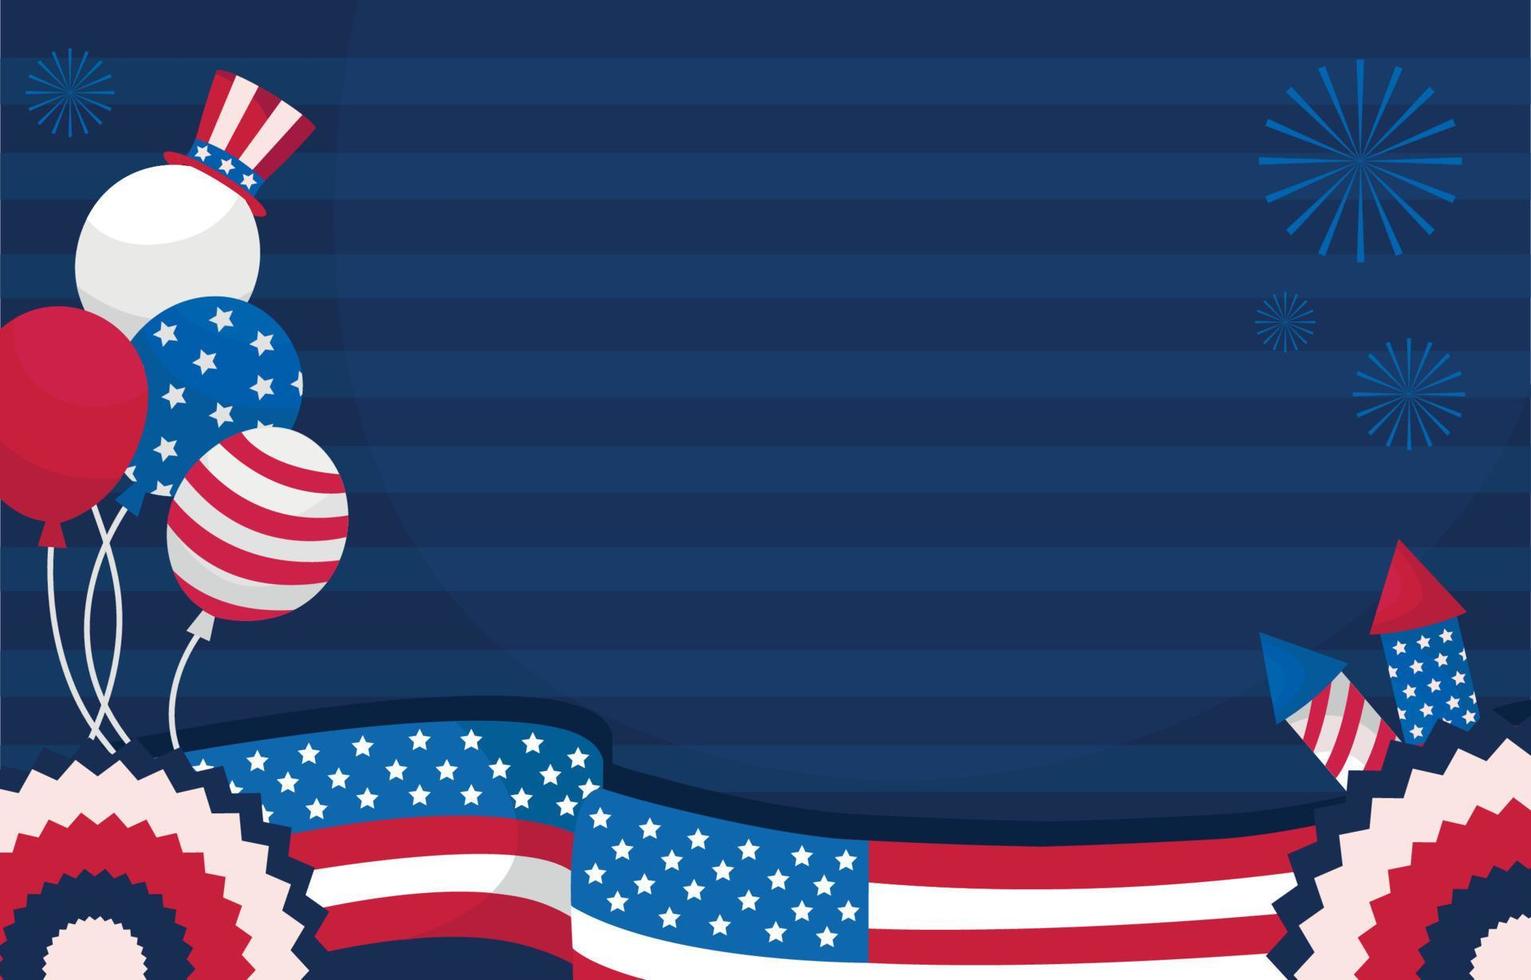 USA 4th of July Independence Background vector